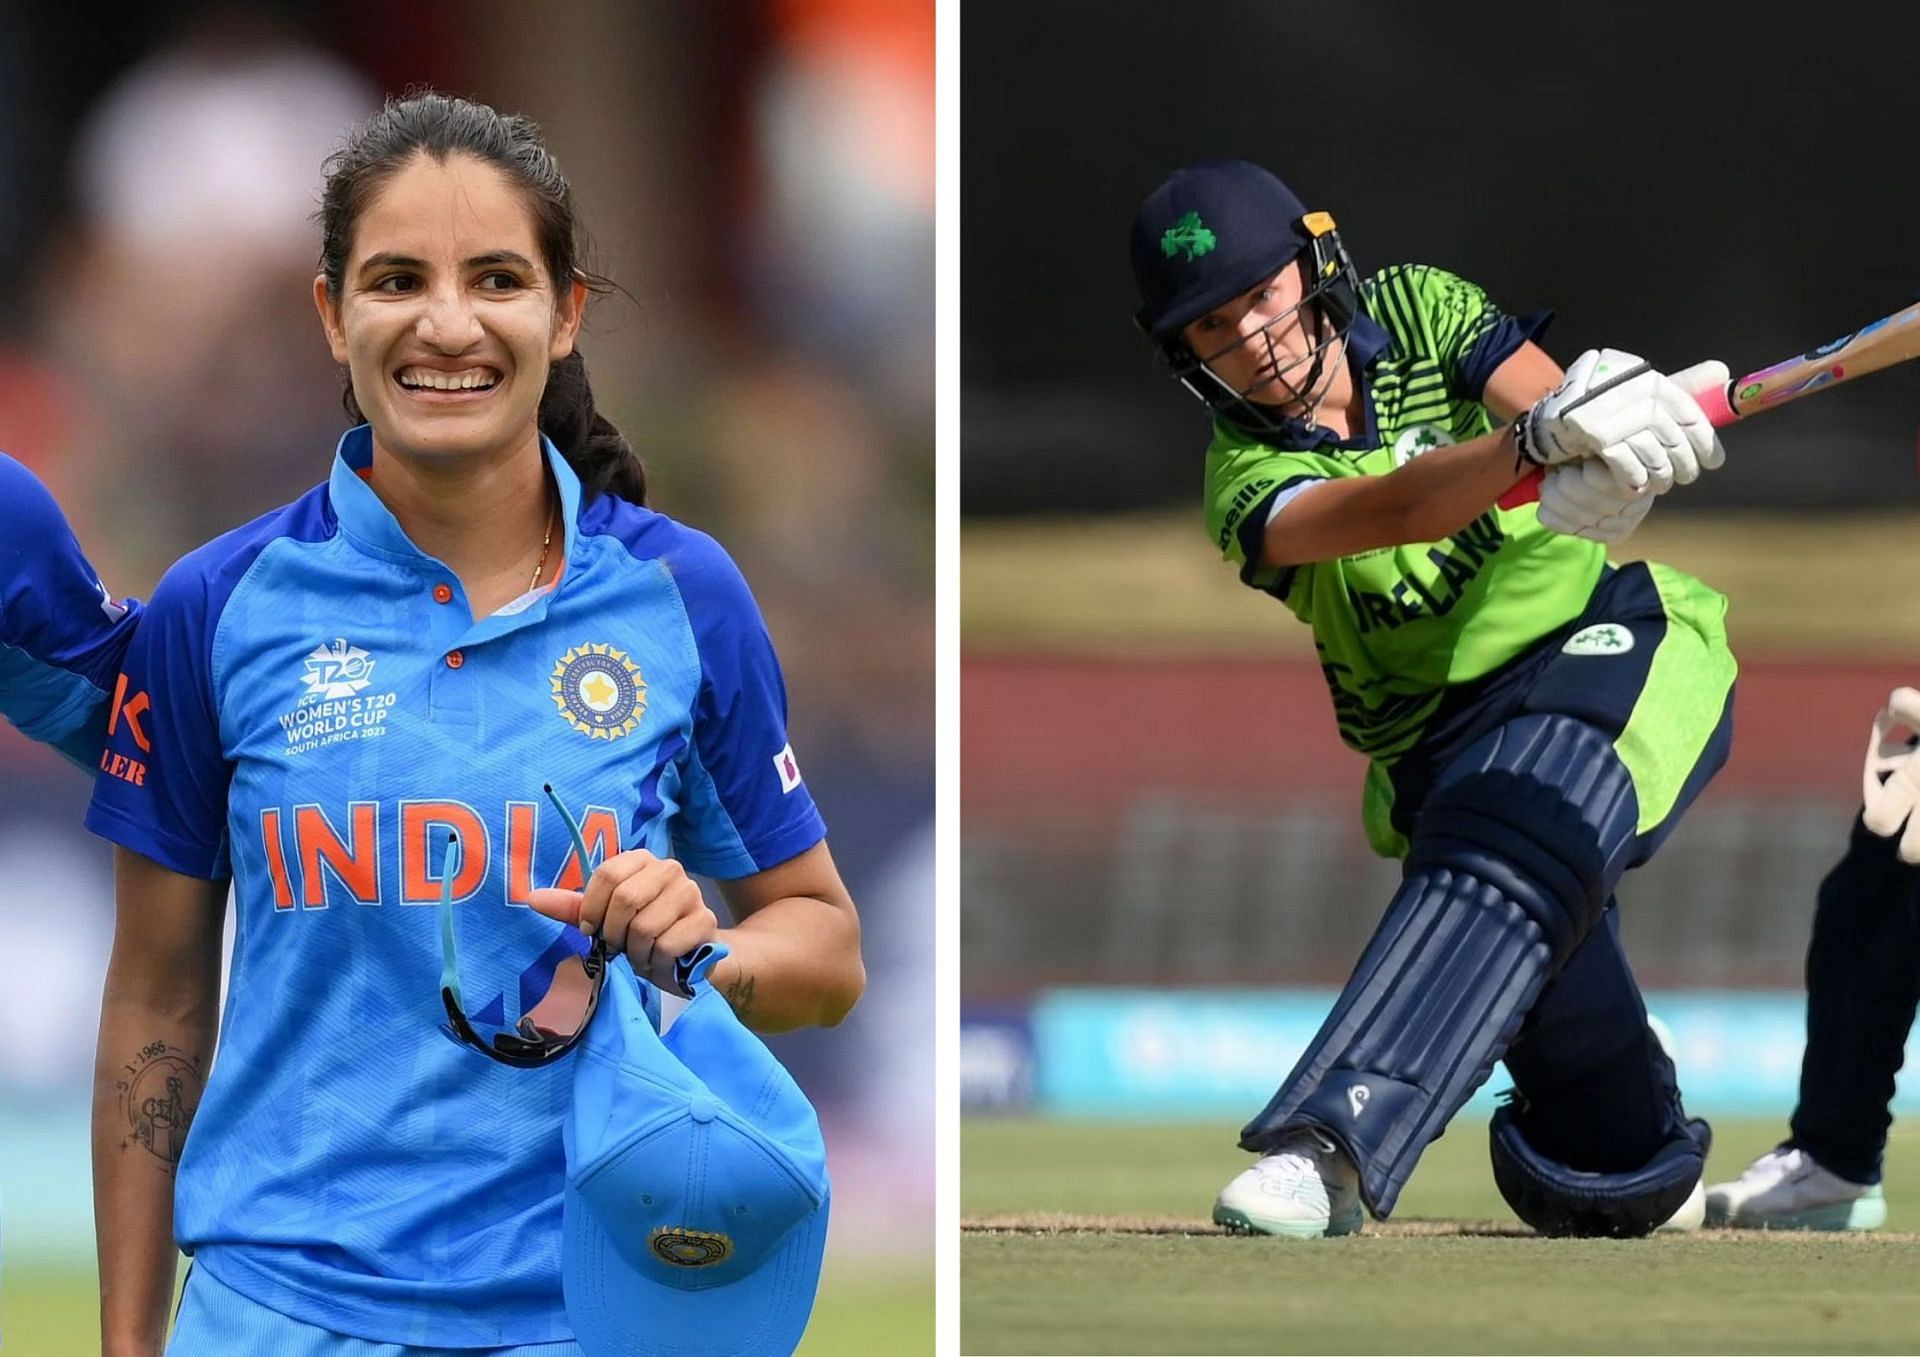 Renuka Singh will look to continue her stellar form and stop Gaby Lewis from dictating terms on Monday.